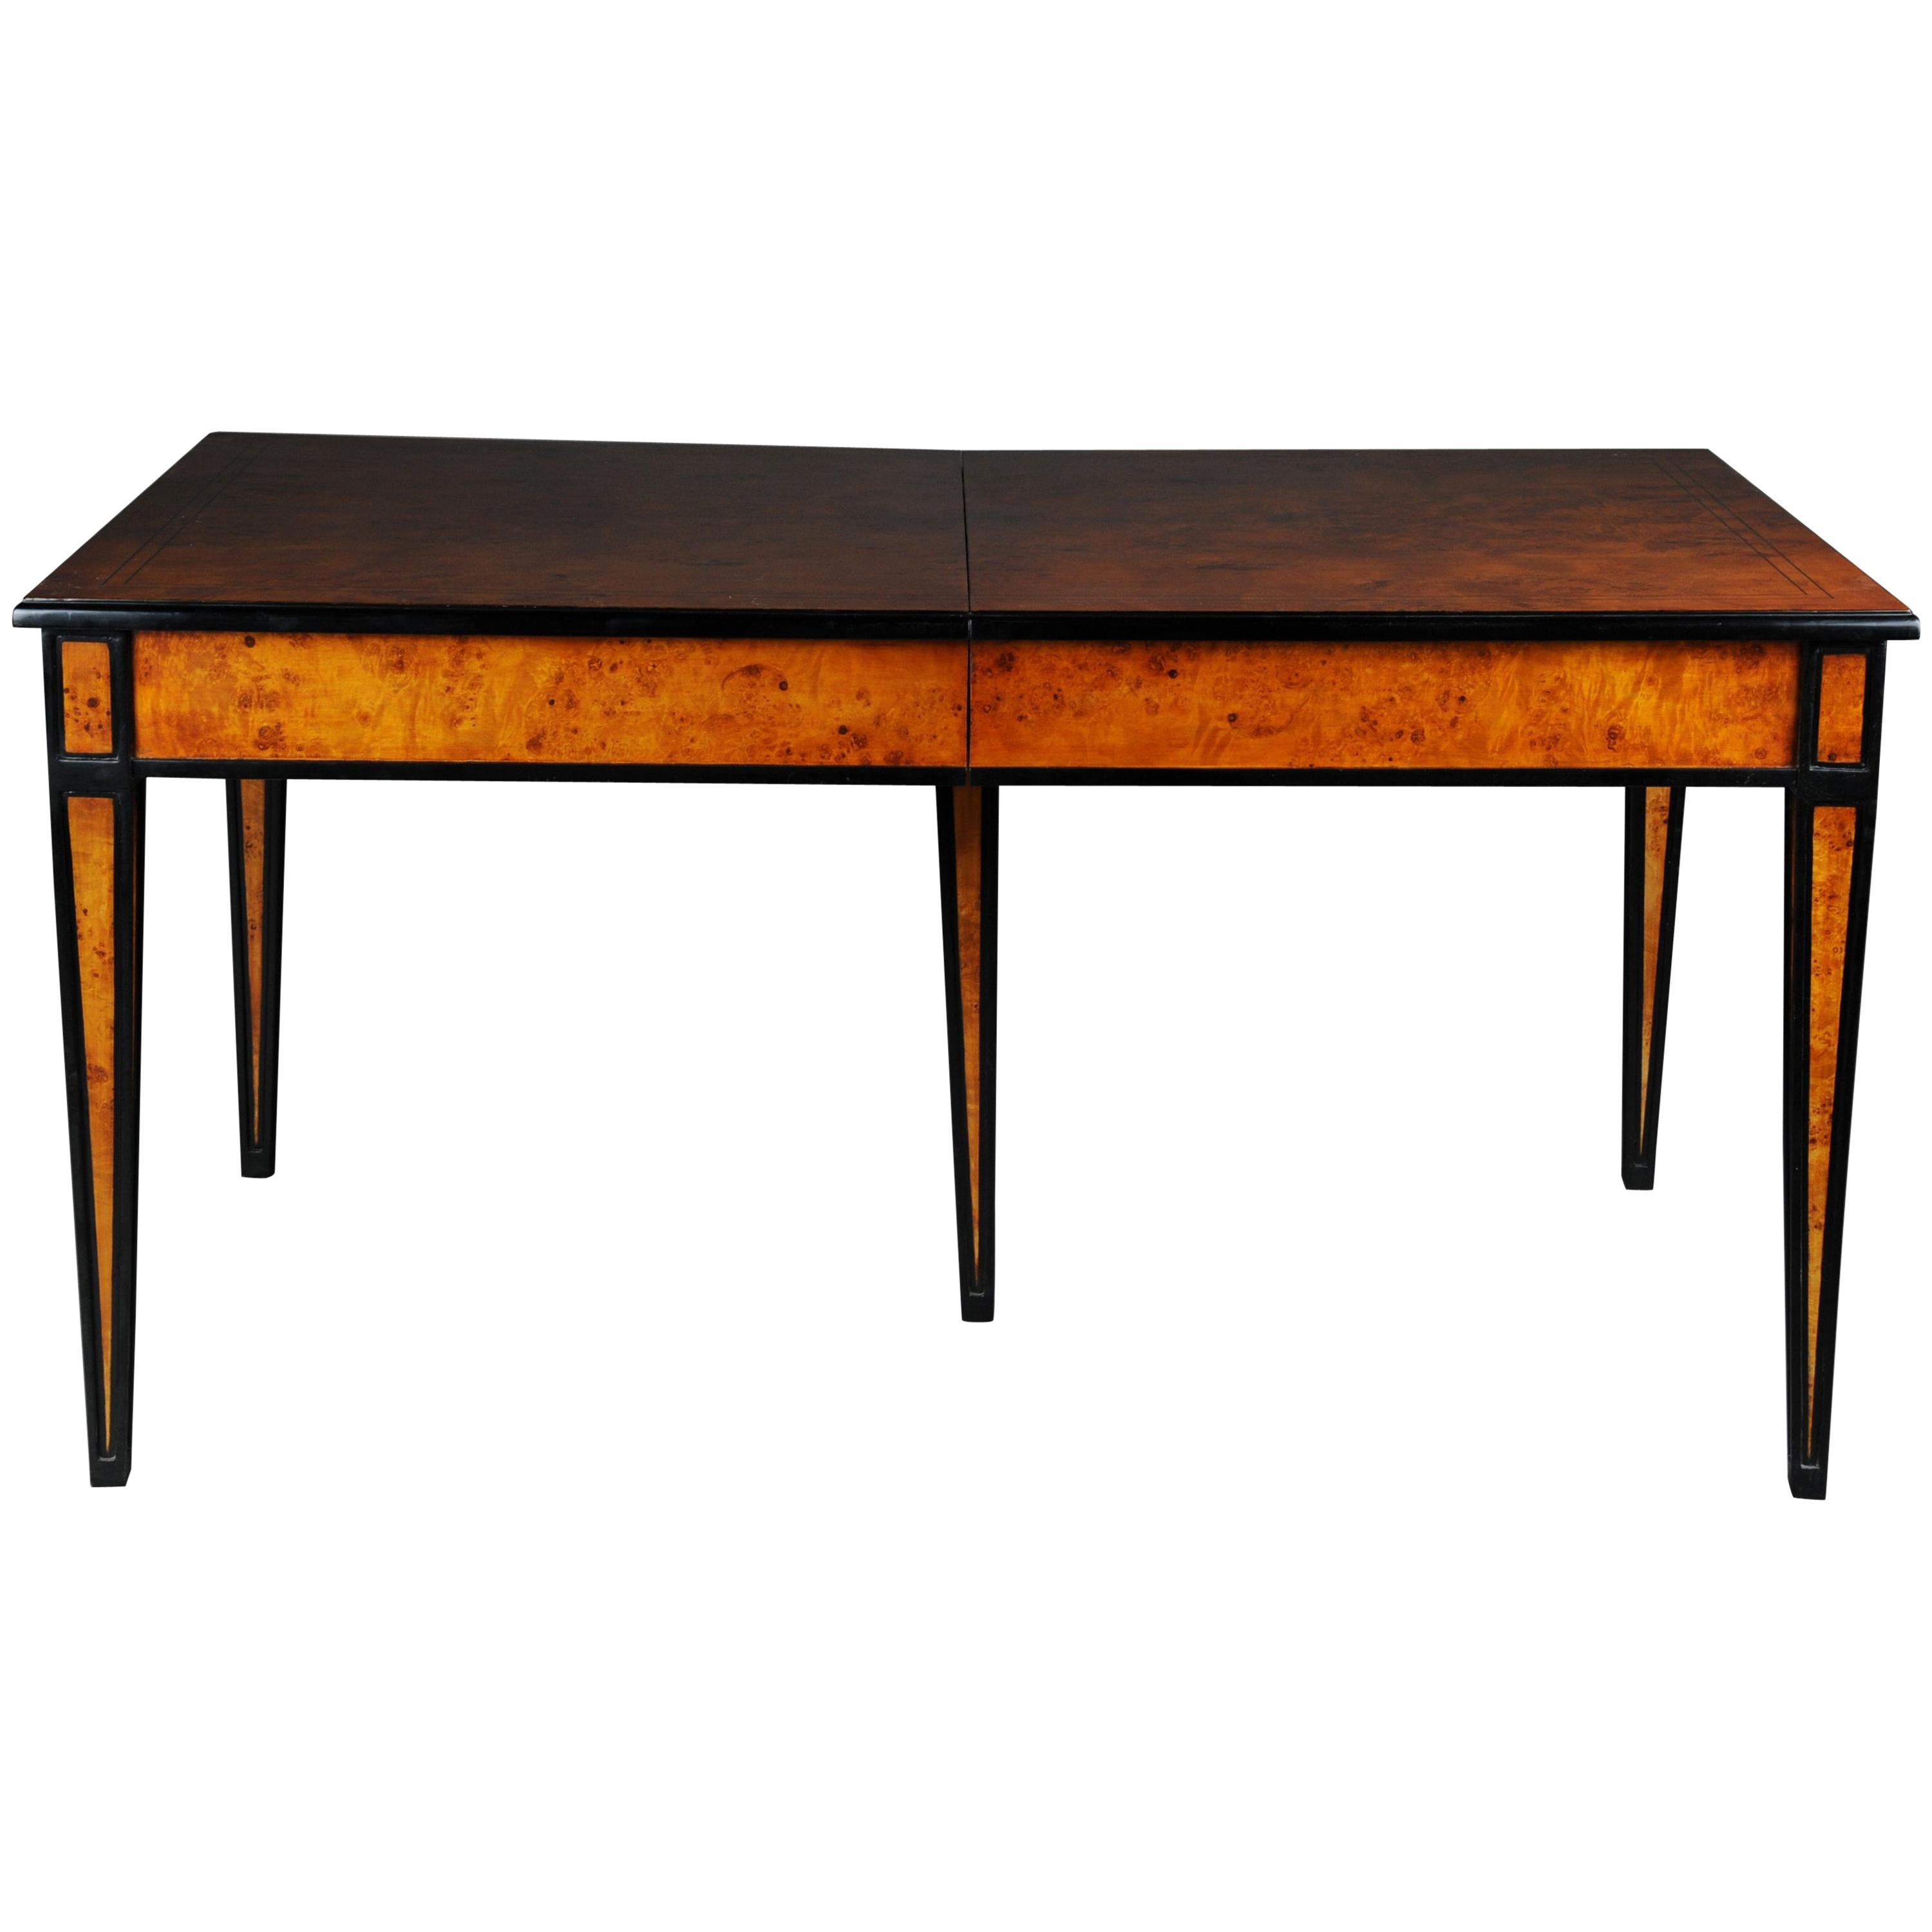 Dining Table / Conference Table, Extendable in Biedermeier Style, Maple